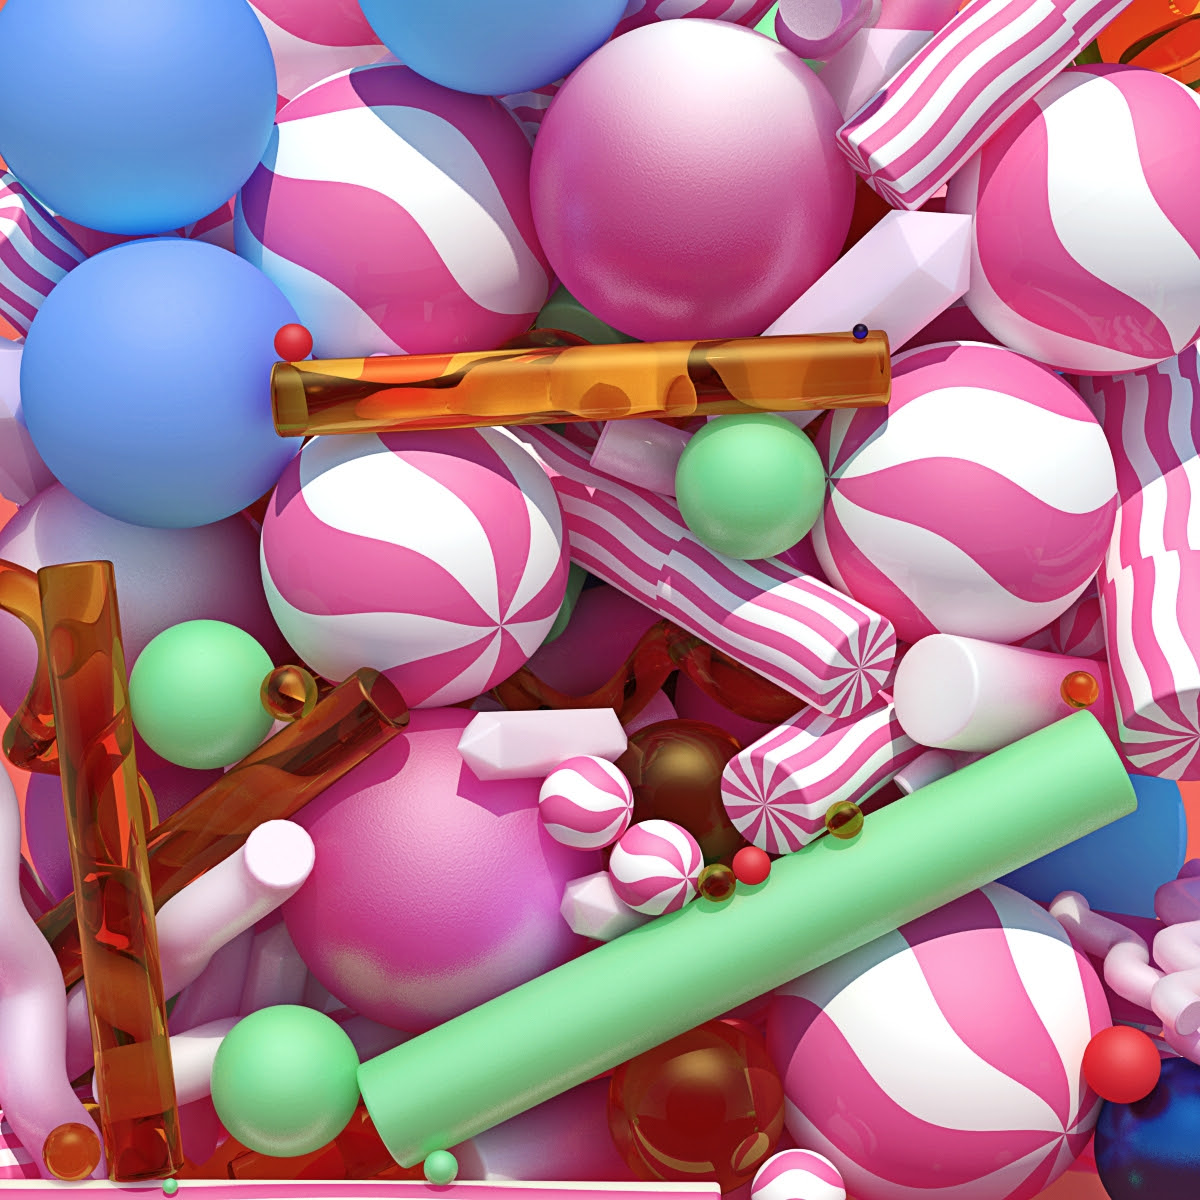 3D candy and shapes